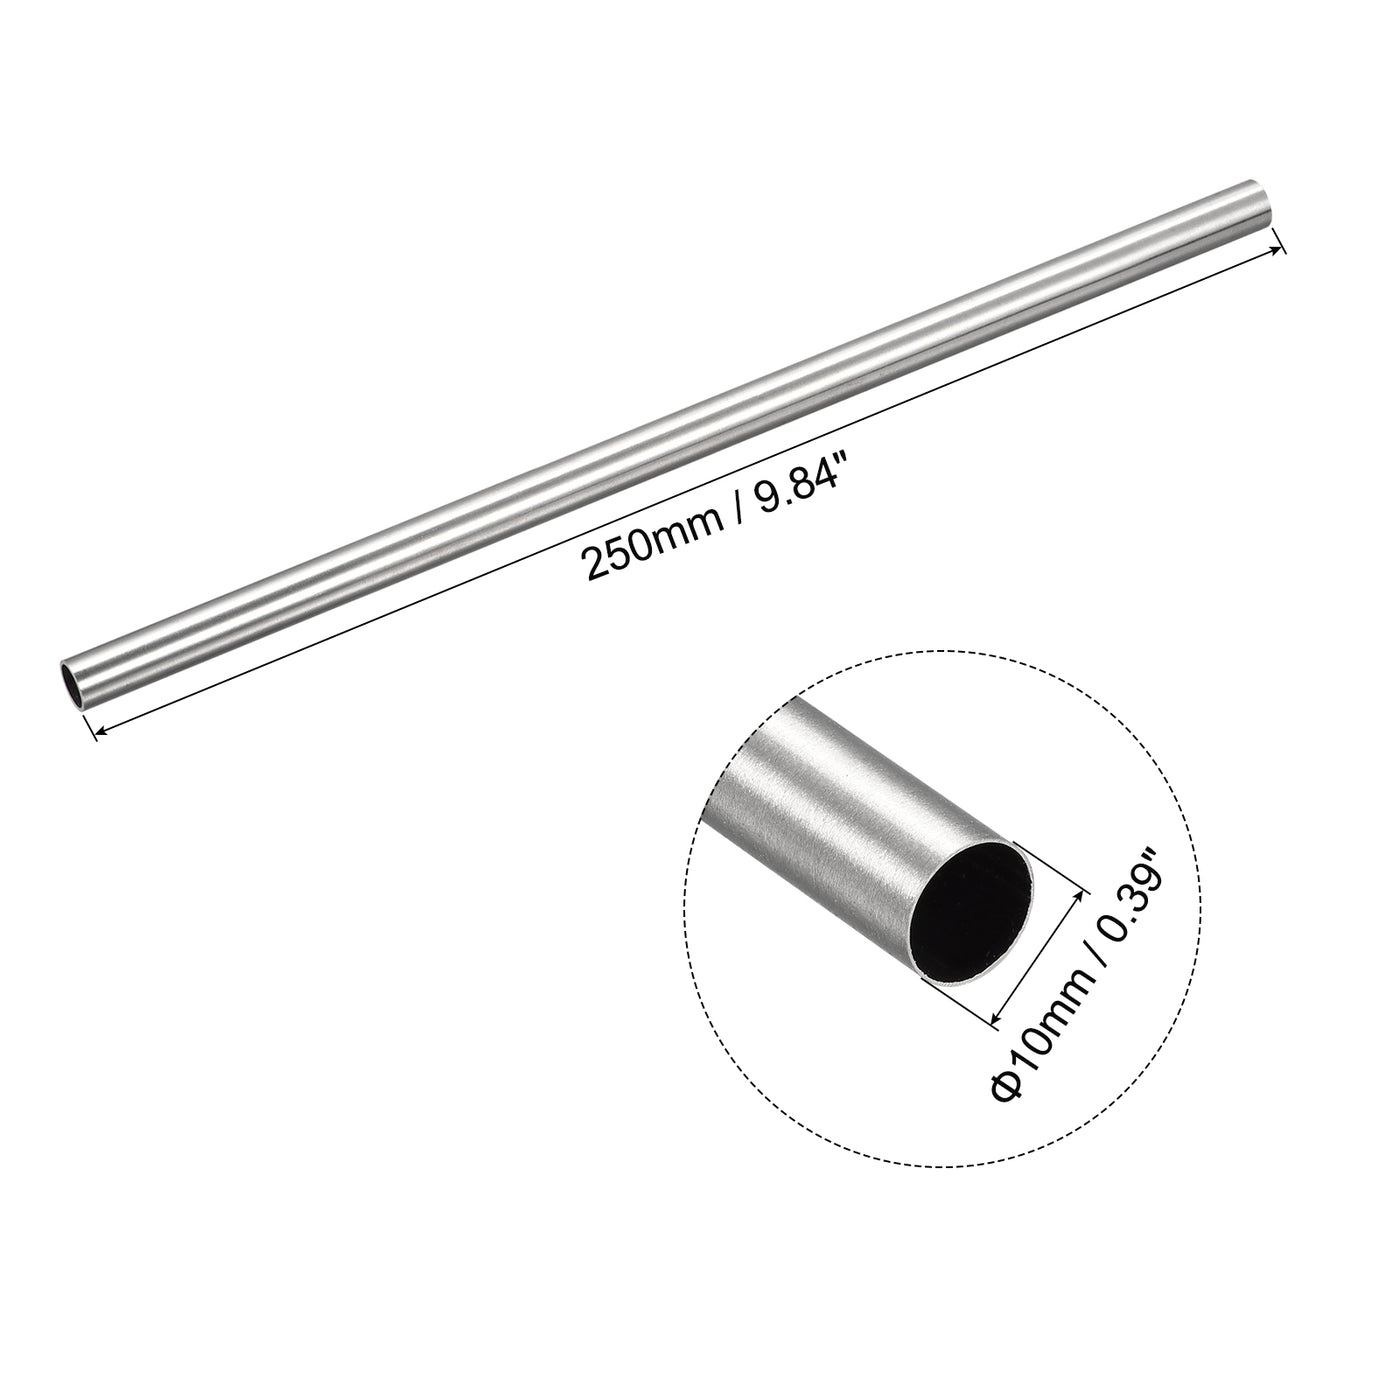 uxcell Uxcell 316 Stainless Steel Tube, Seamless Pipe Tubing